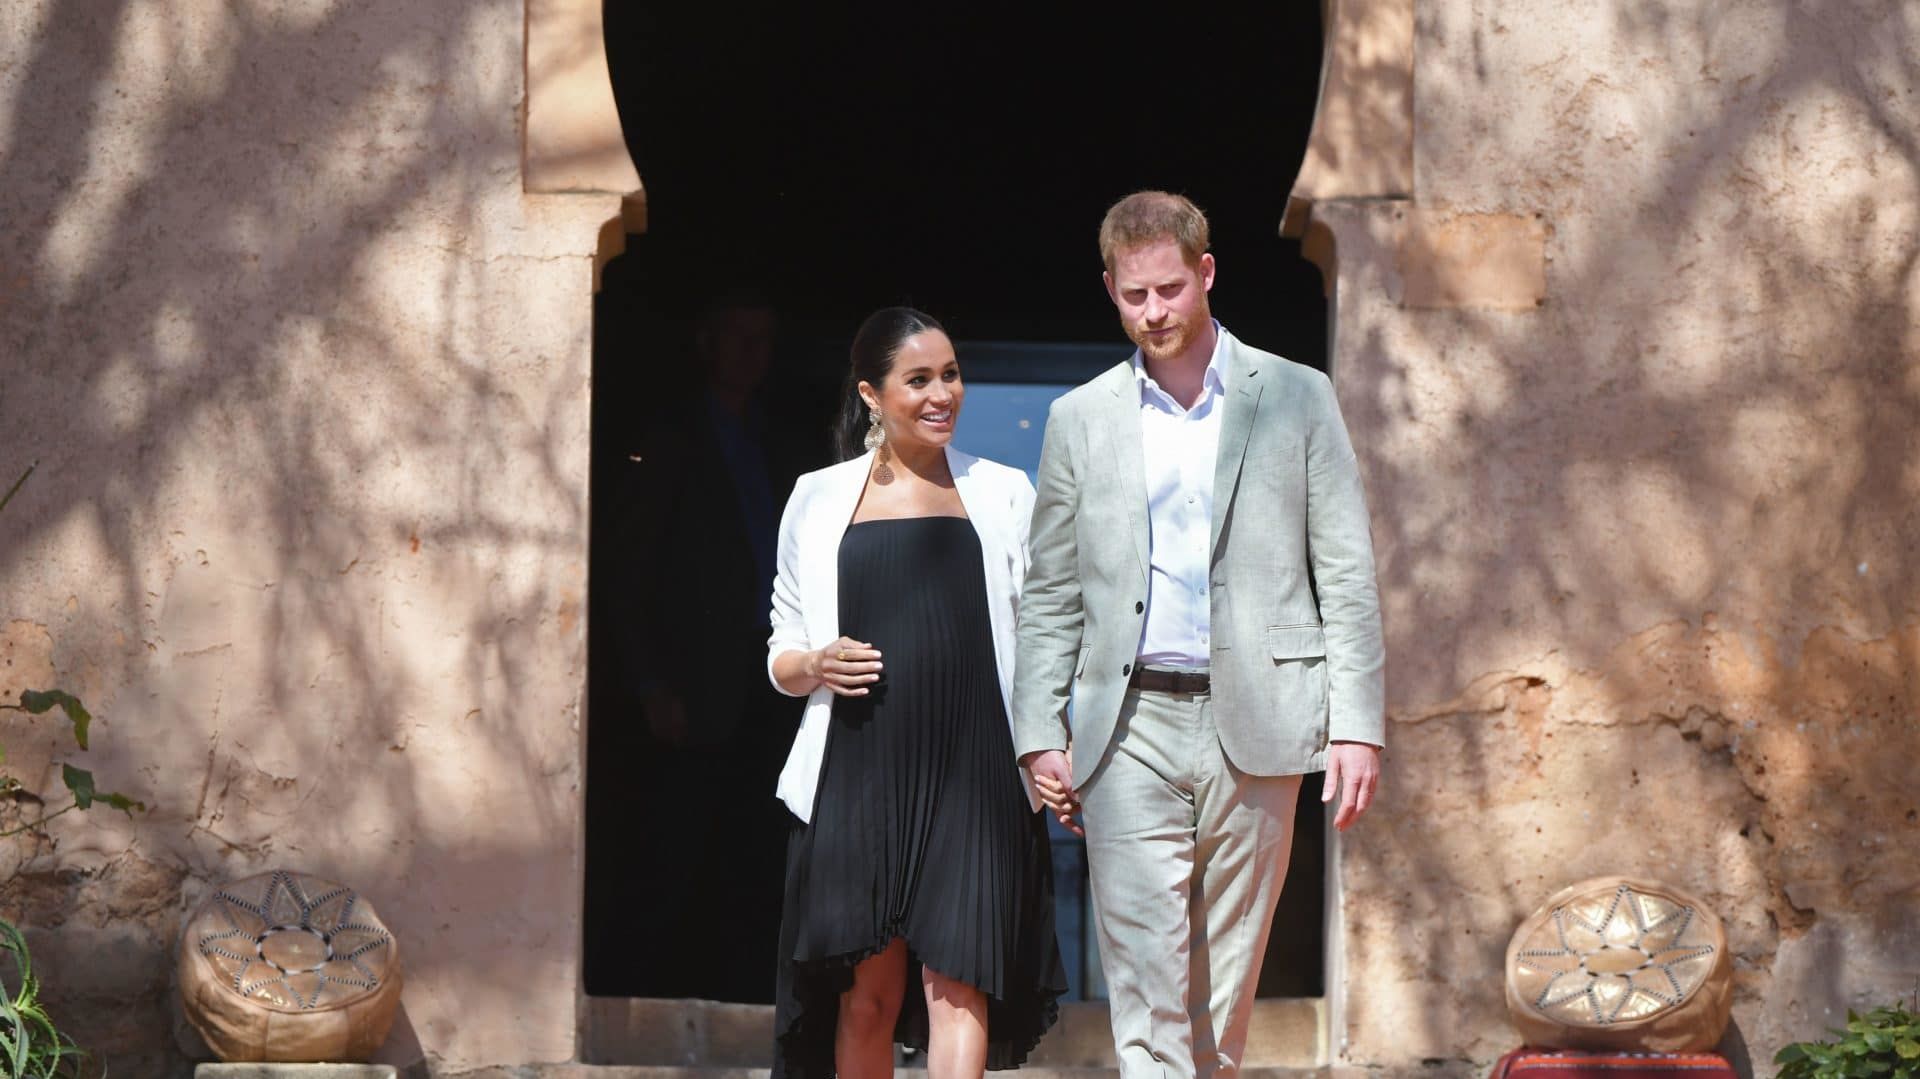 Piers Morgan Receives Backlash For Telling Meghan Markle To "Go Back To America"